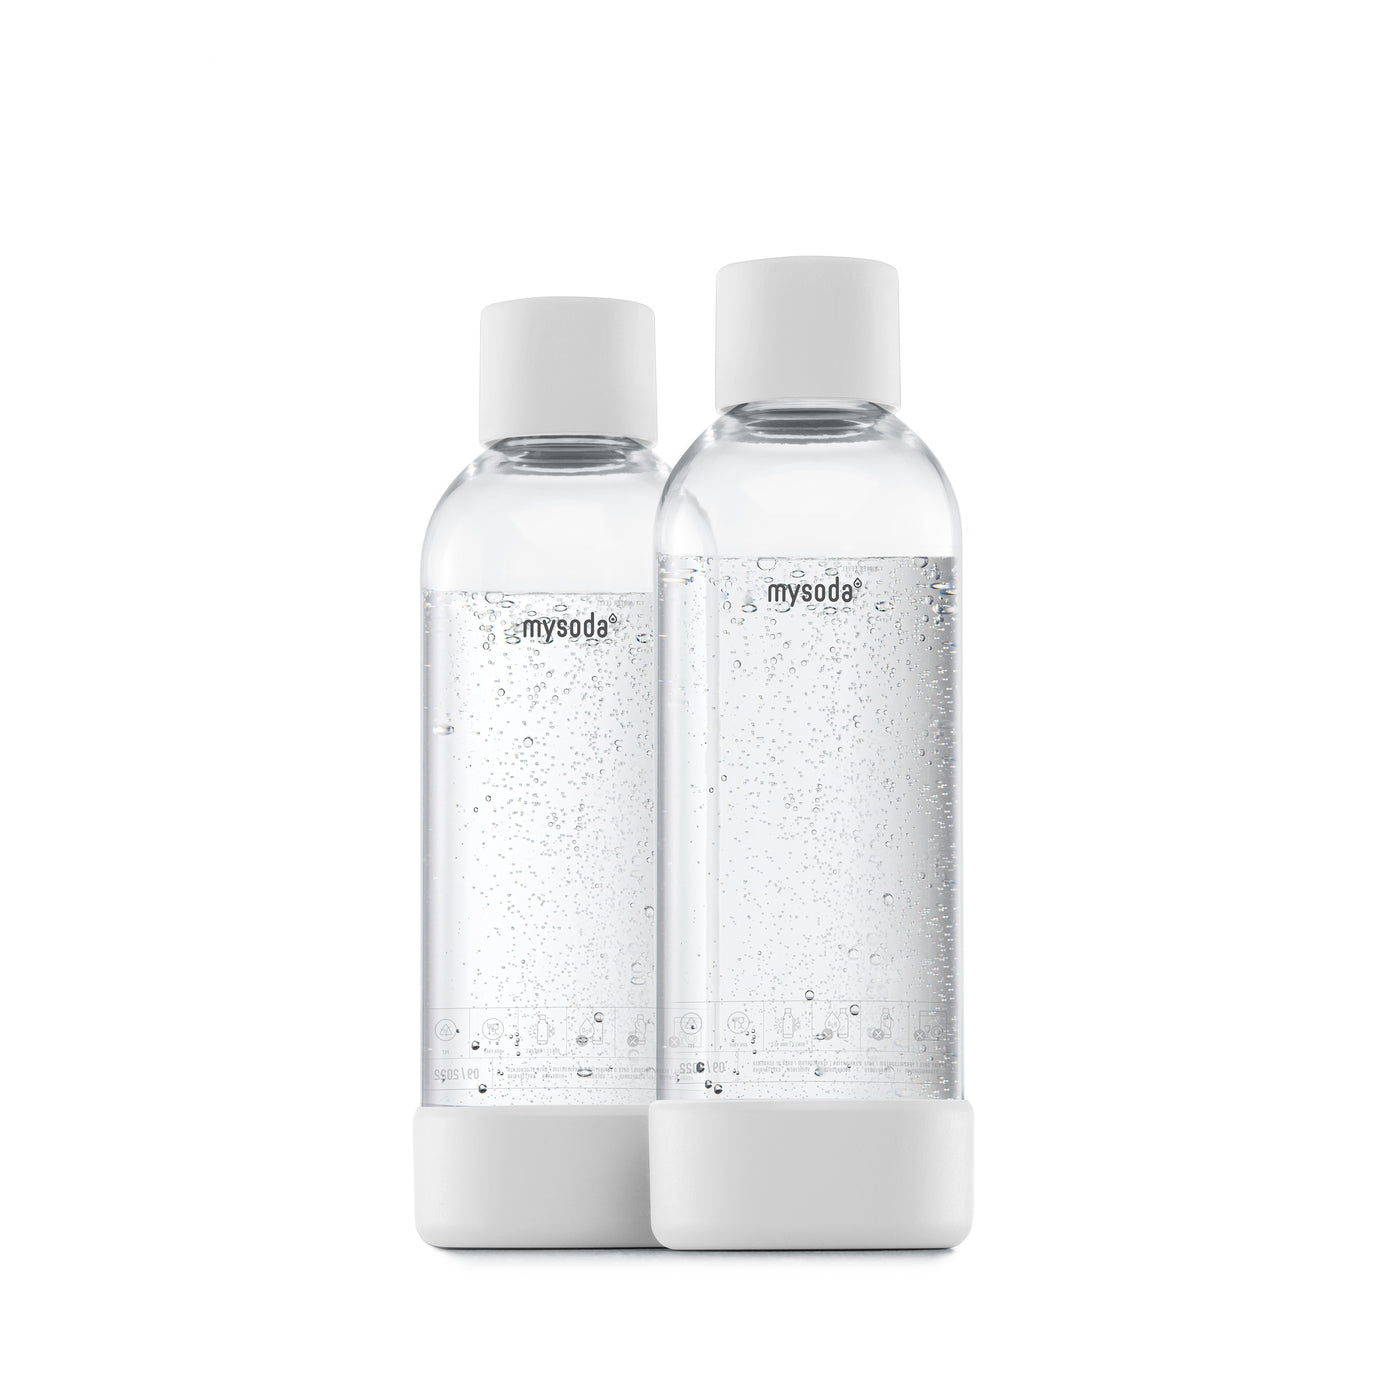 Two 1 liter Mysoda water bottles with white bottom and cap